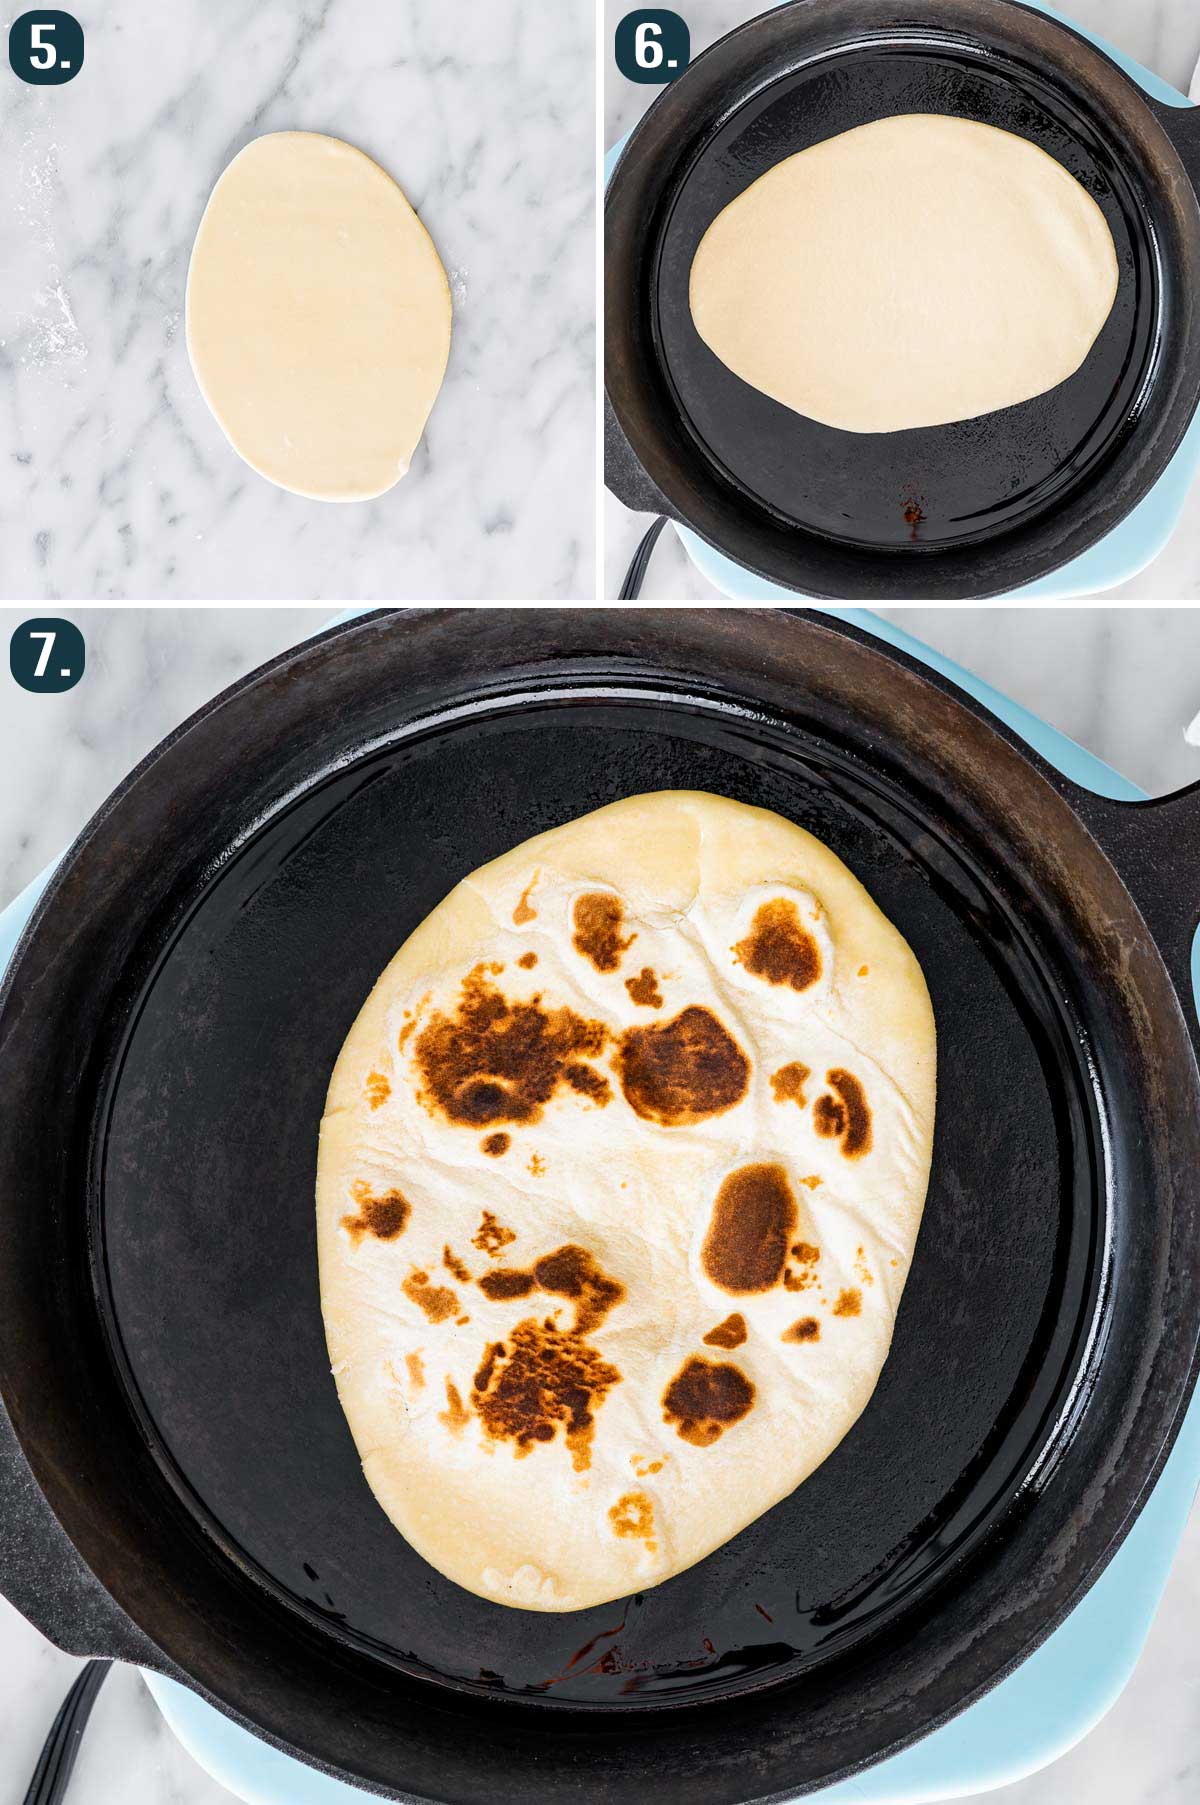 process shots showing how to cook flatbreads.